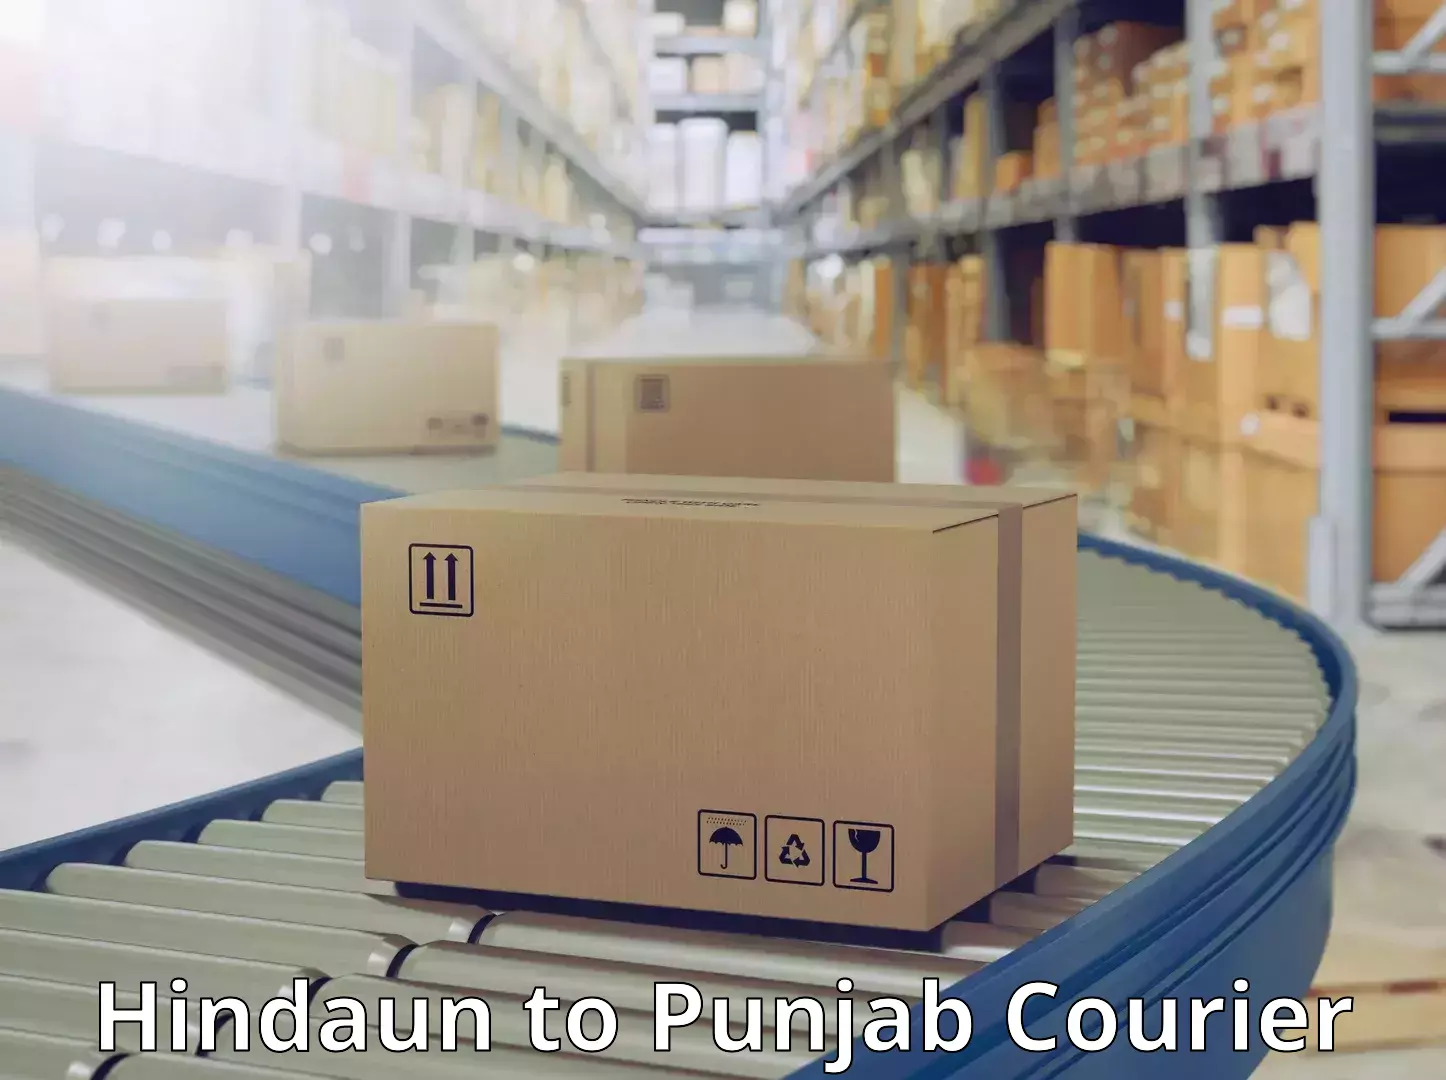 Round-the-clock parcel delivery Hindaun to Central University of Punjab Bathinda